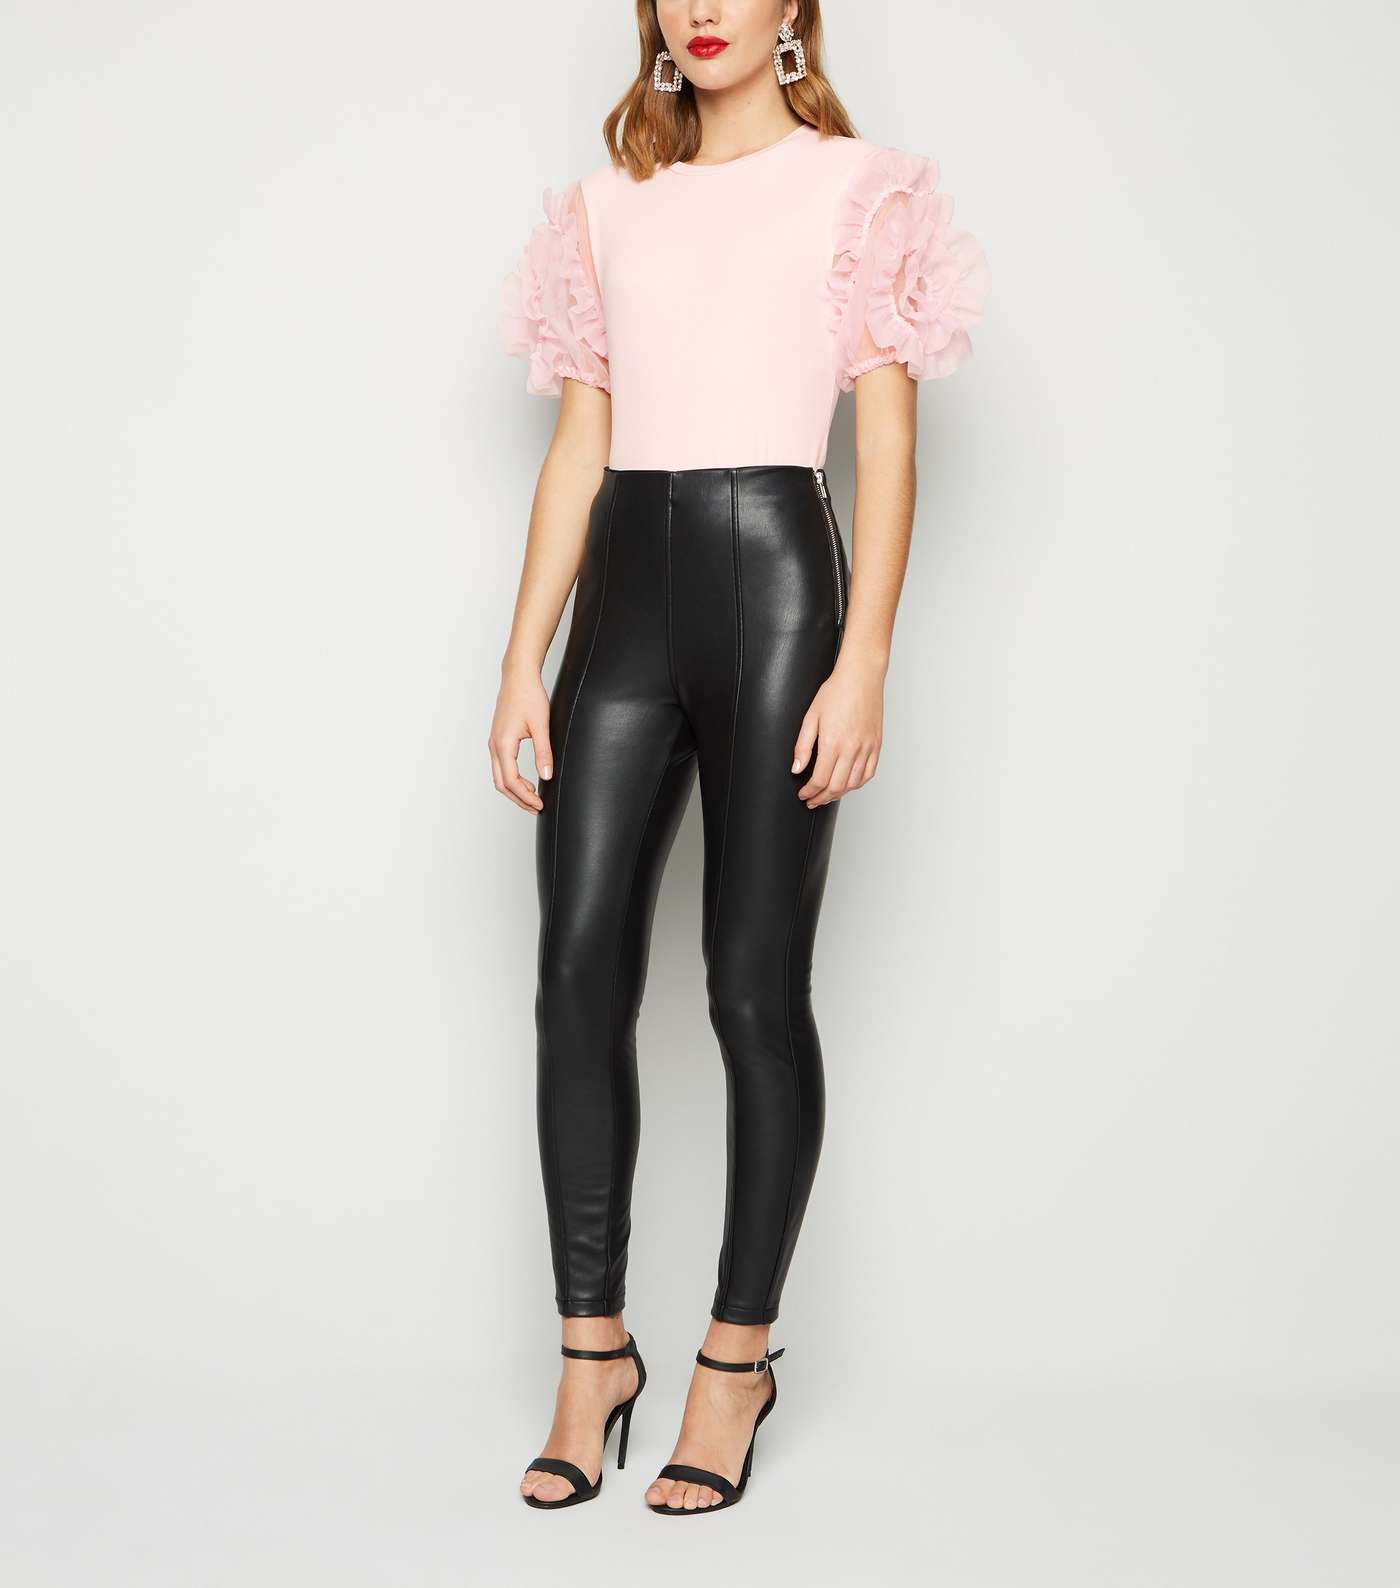 Cameo Rose Pale Pink Ribbed Mesh Sleeve Top Image 2